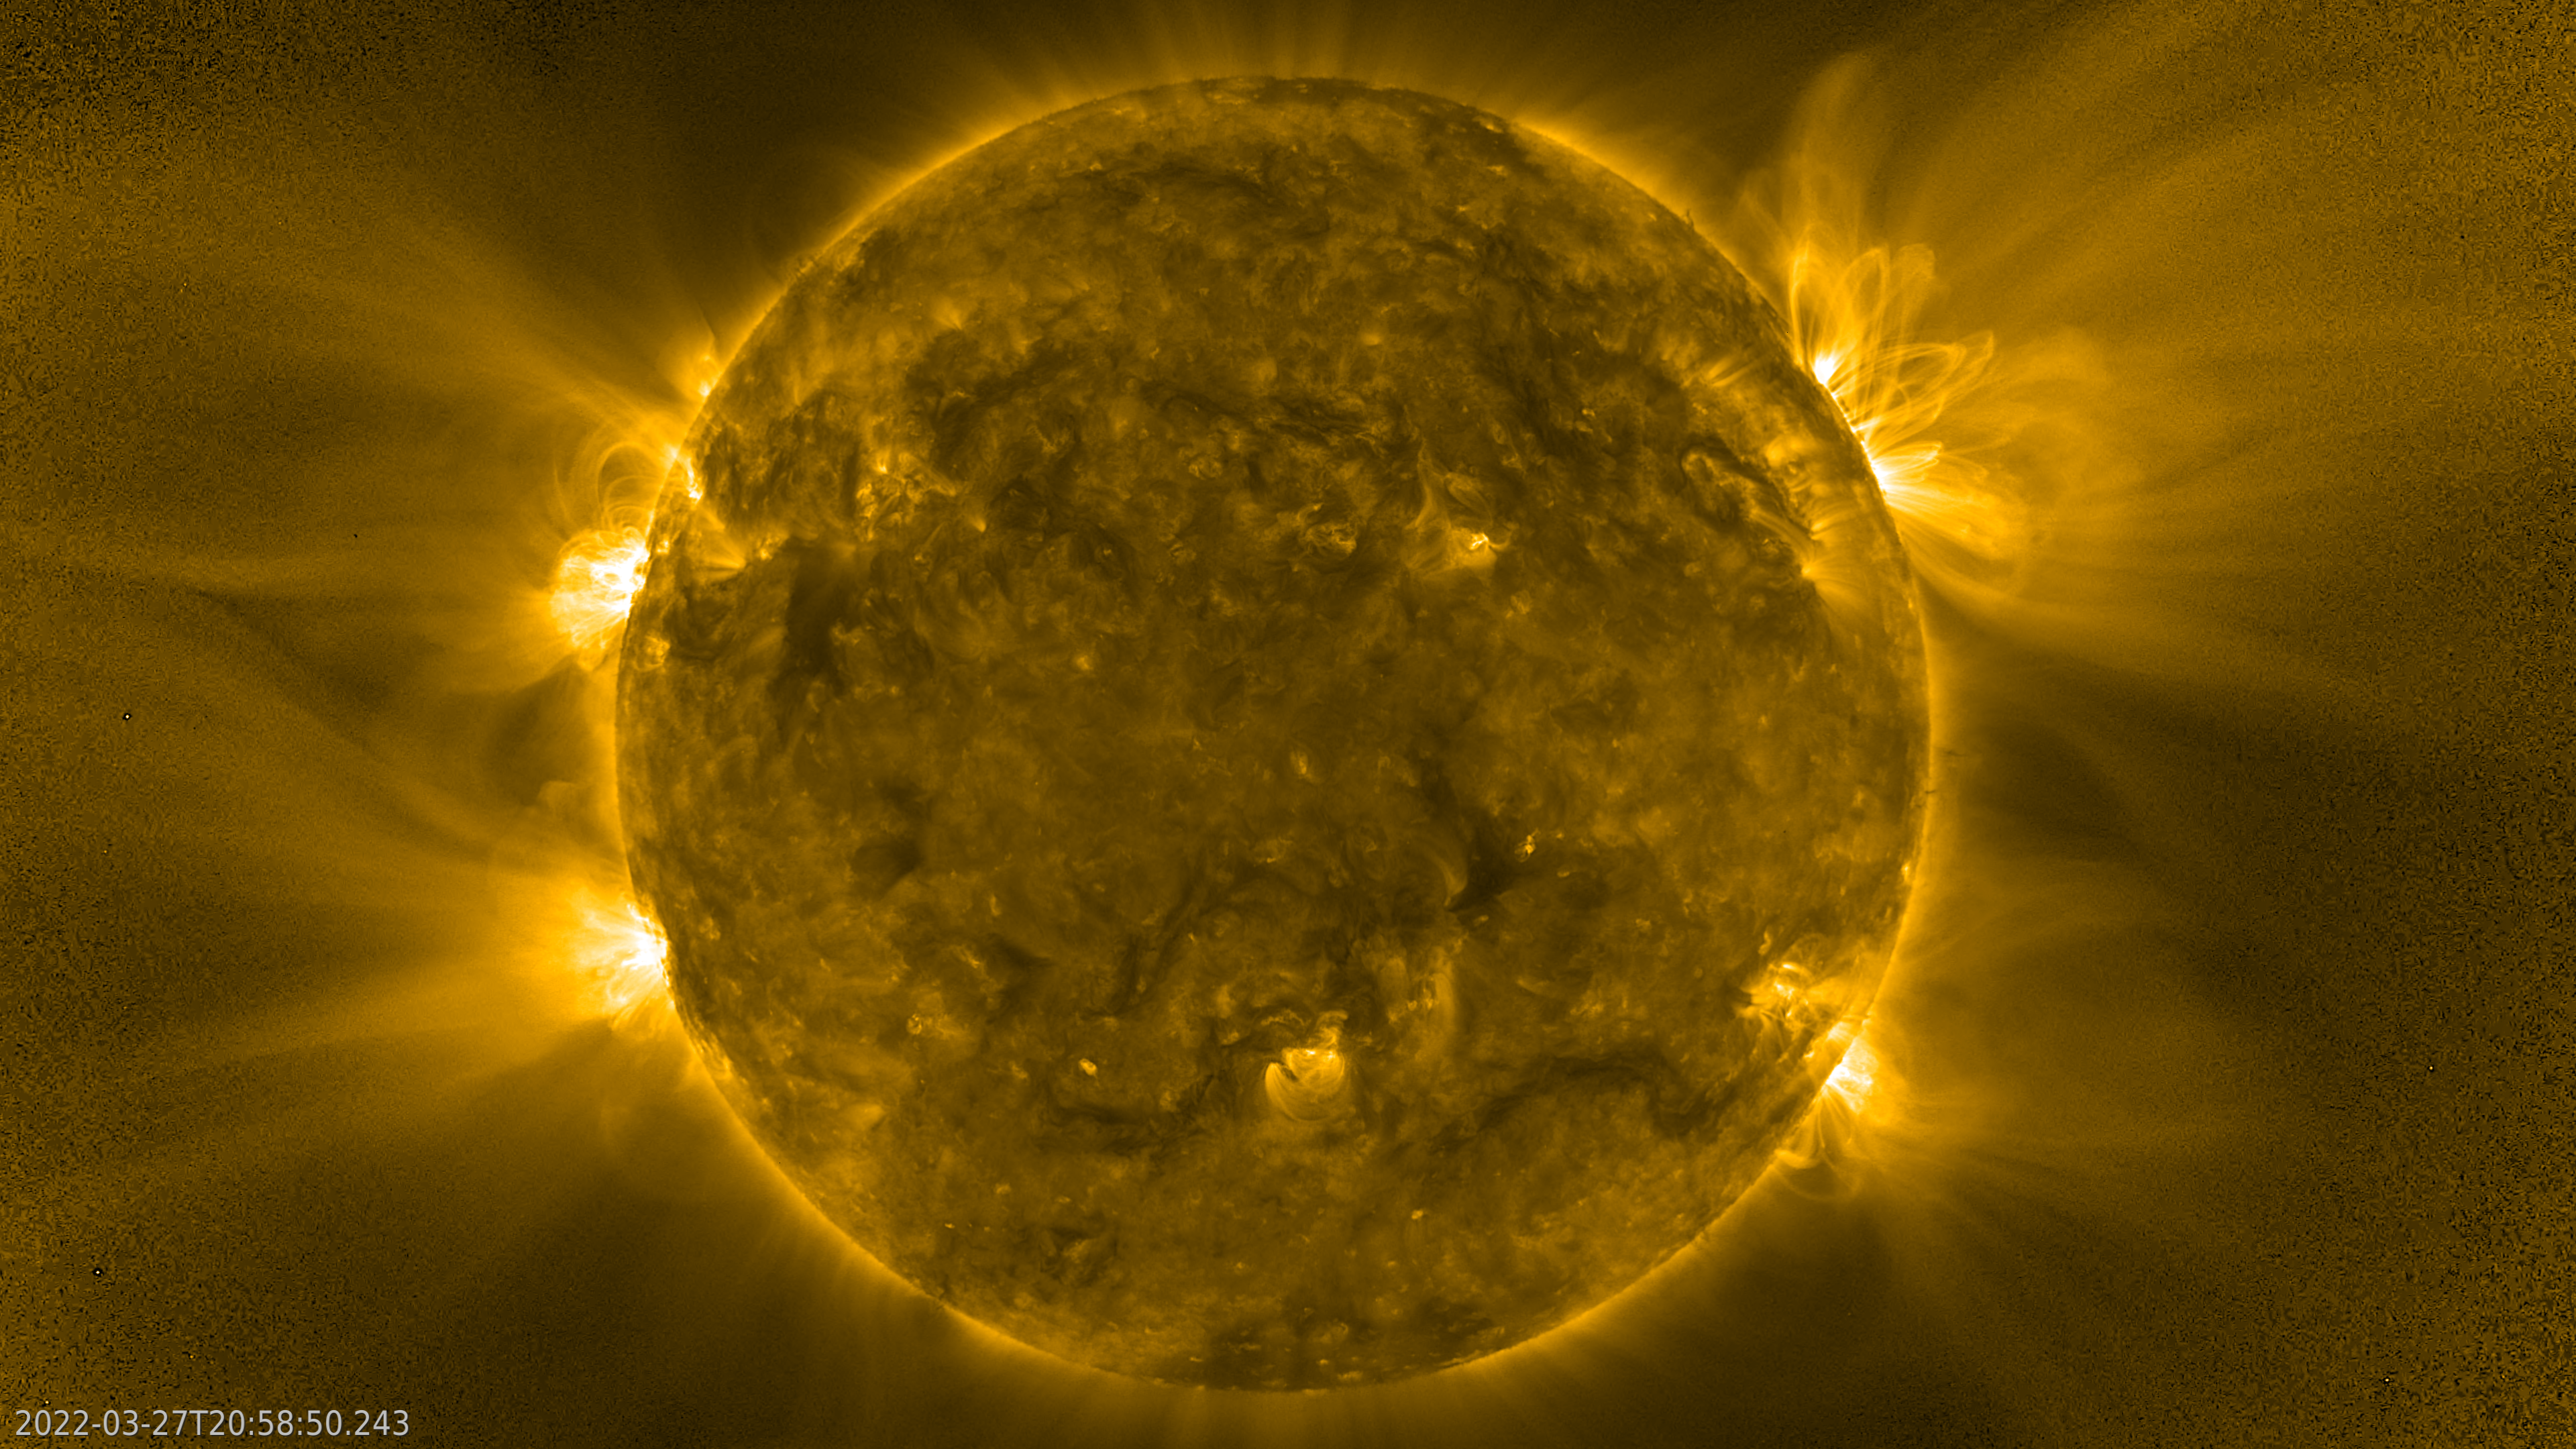 Image of the Sun taken during the perihelion pass